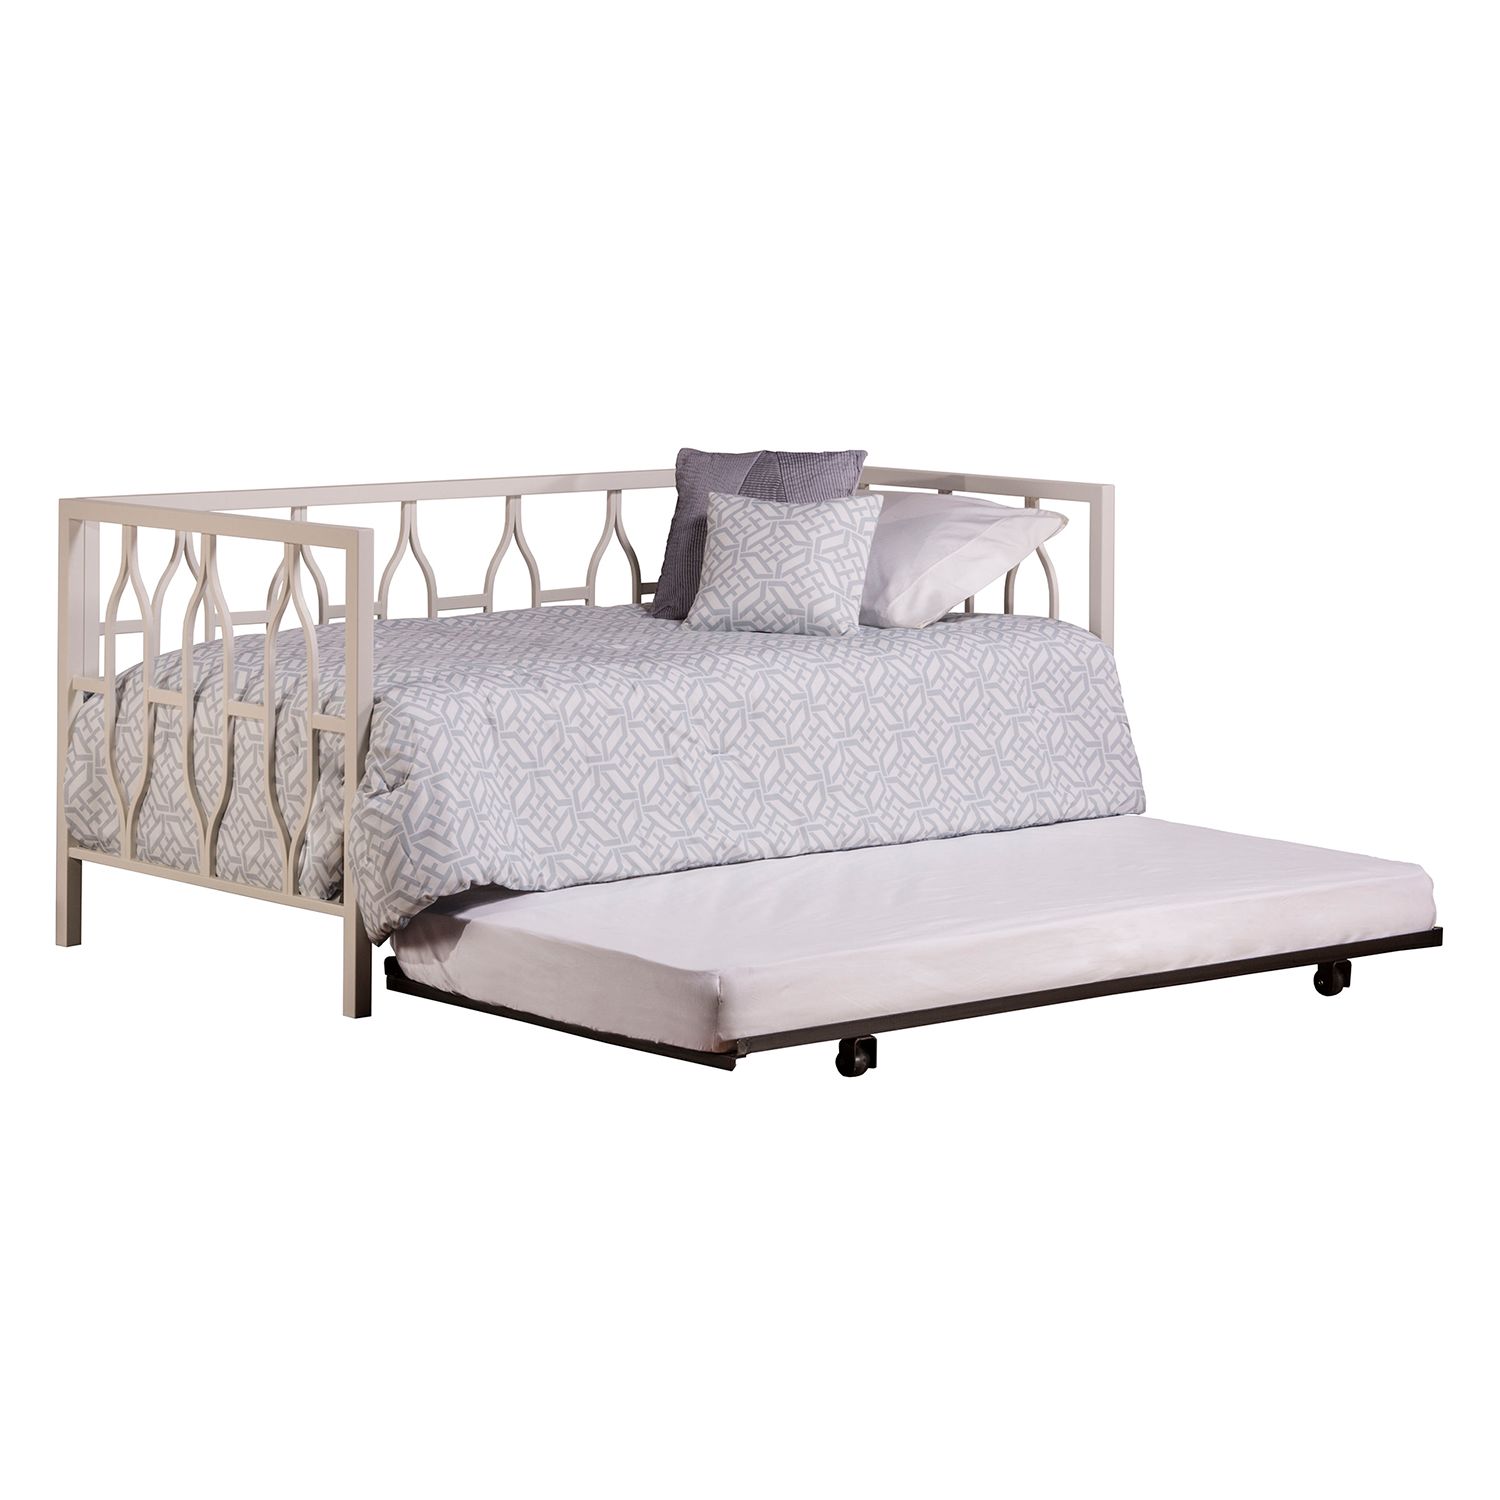 Image for Hillsdale Furniture Hayward Daybed & Trundle at Kohl's.